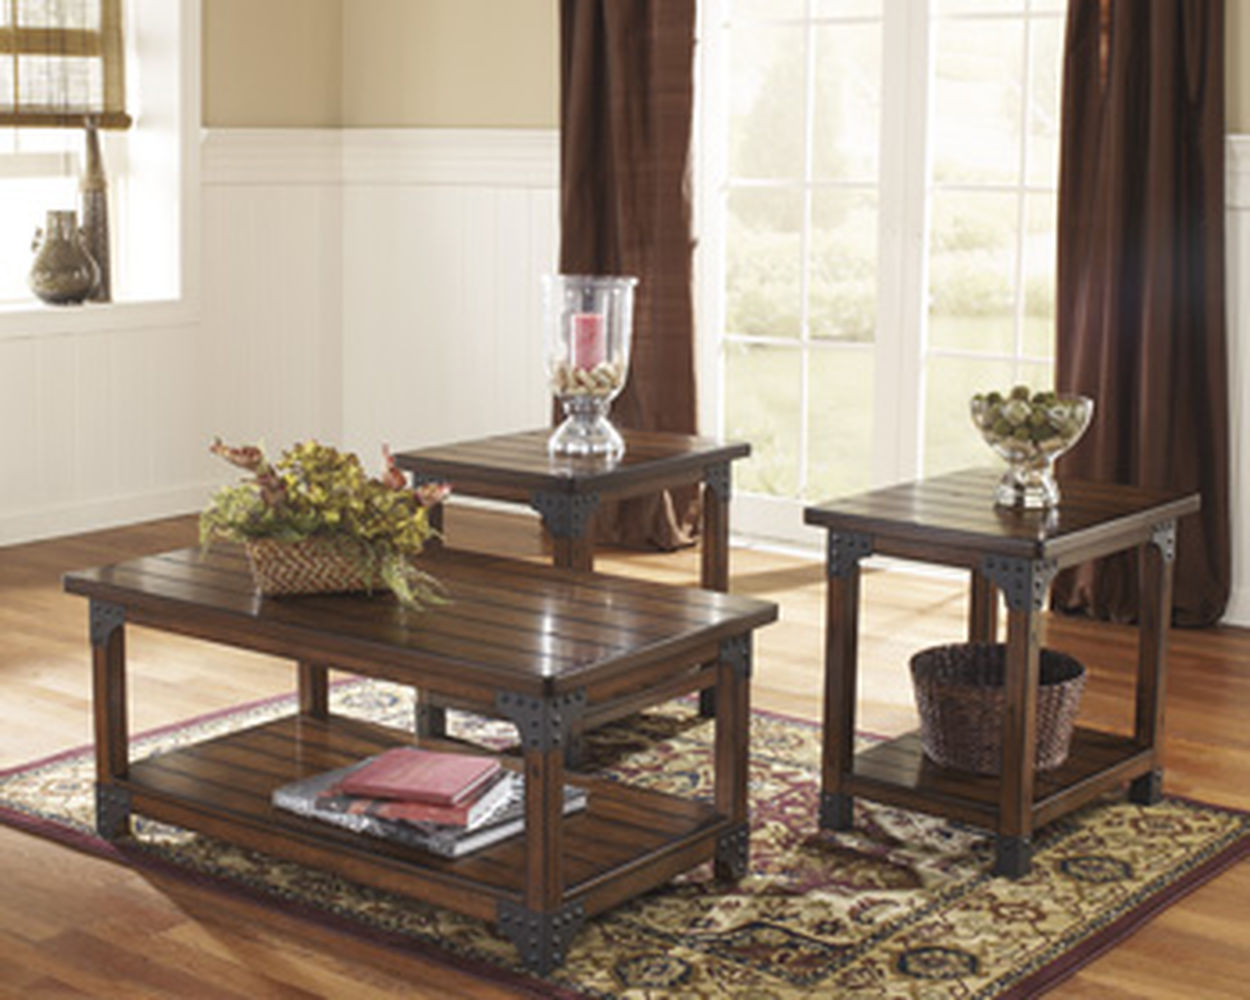 three piece nailhead trim rustic farm house accent table set big with nailheads brown west elm chairs stable target cooler coffee wicker storage buffet side pier one credit card